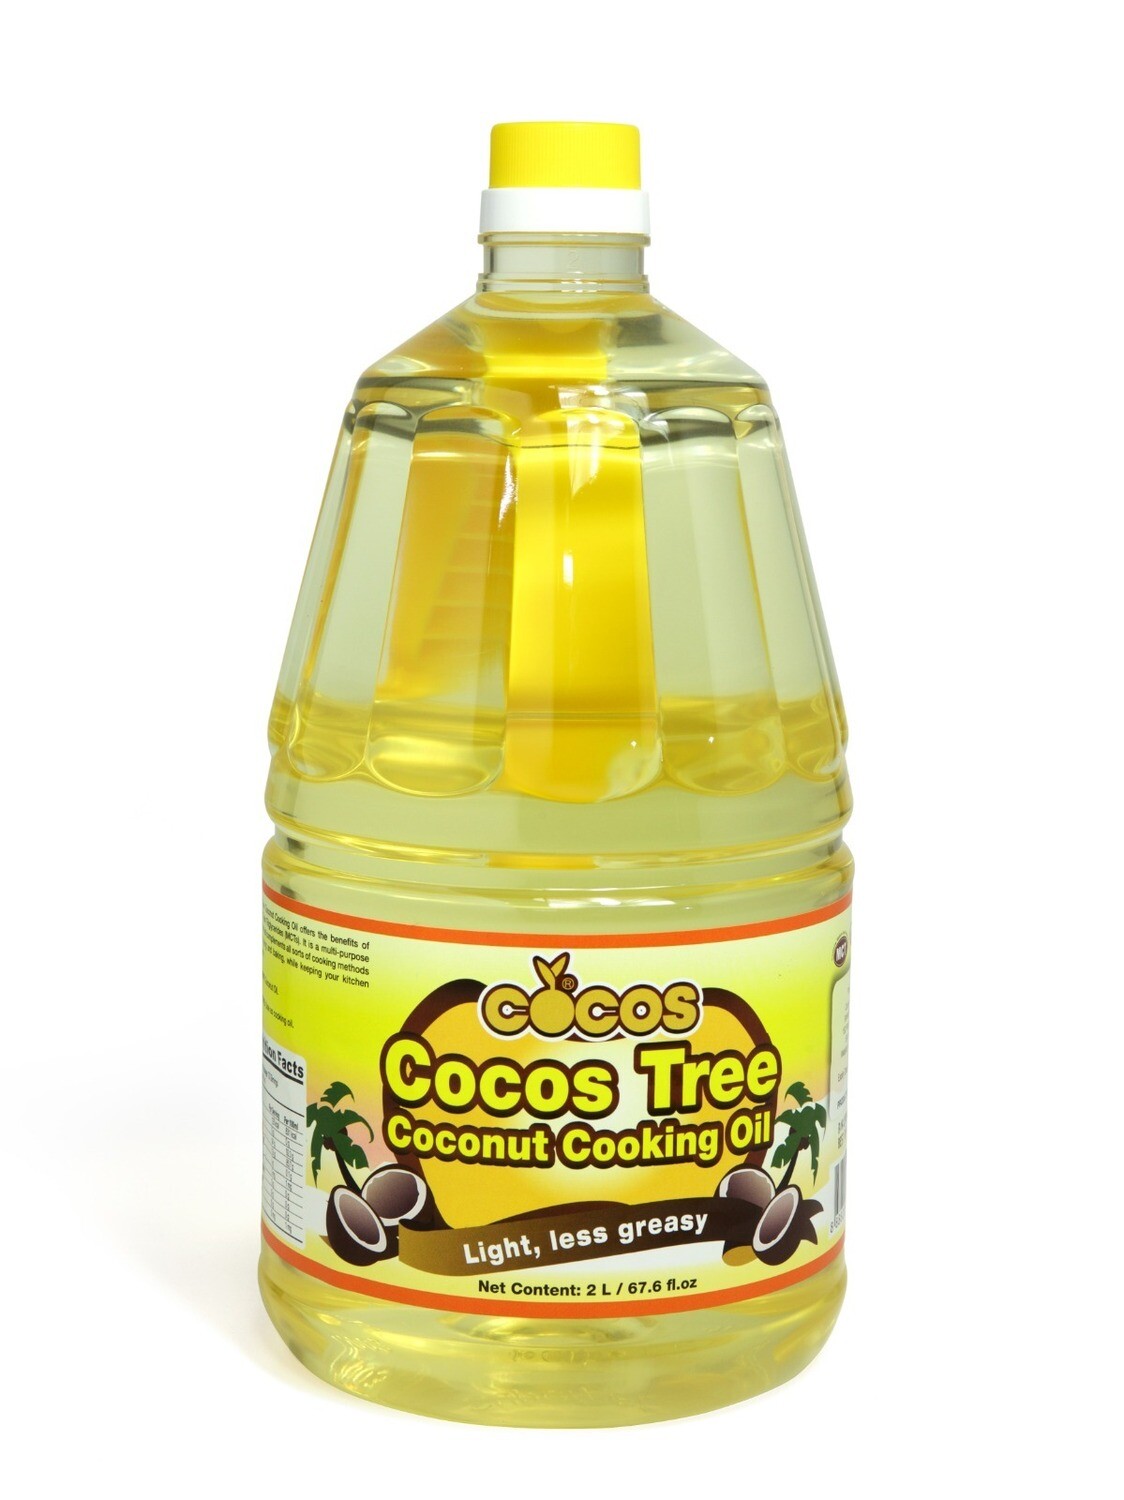 COLD PRESSED COCONUT COOKING OIL - SINGAPORE